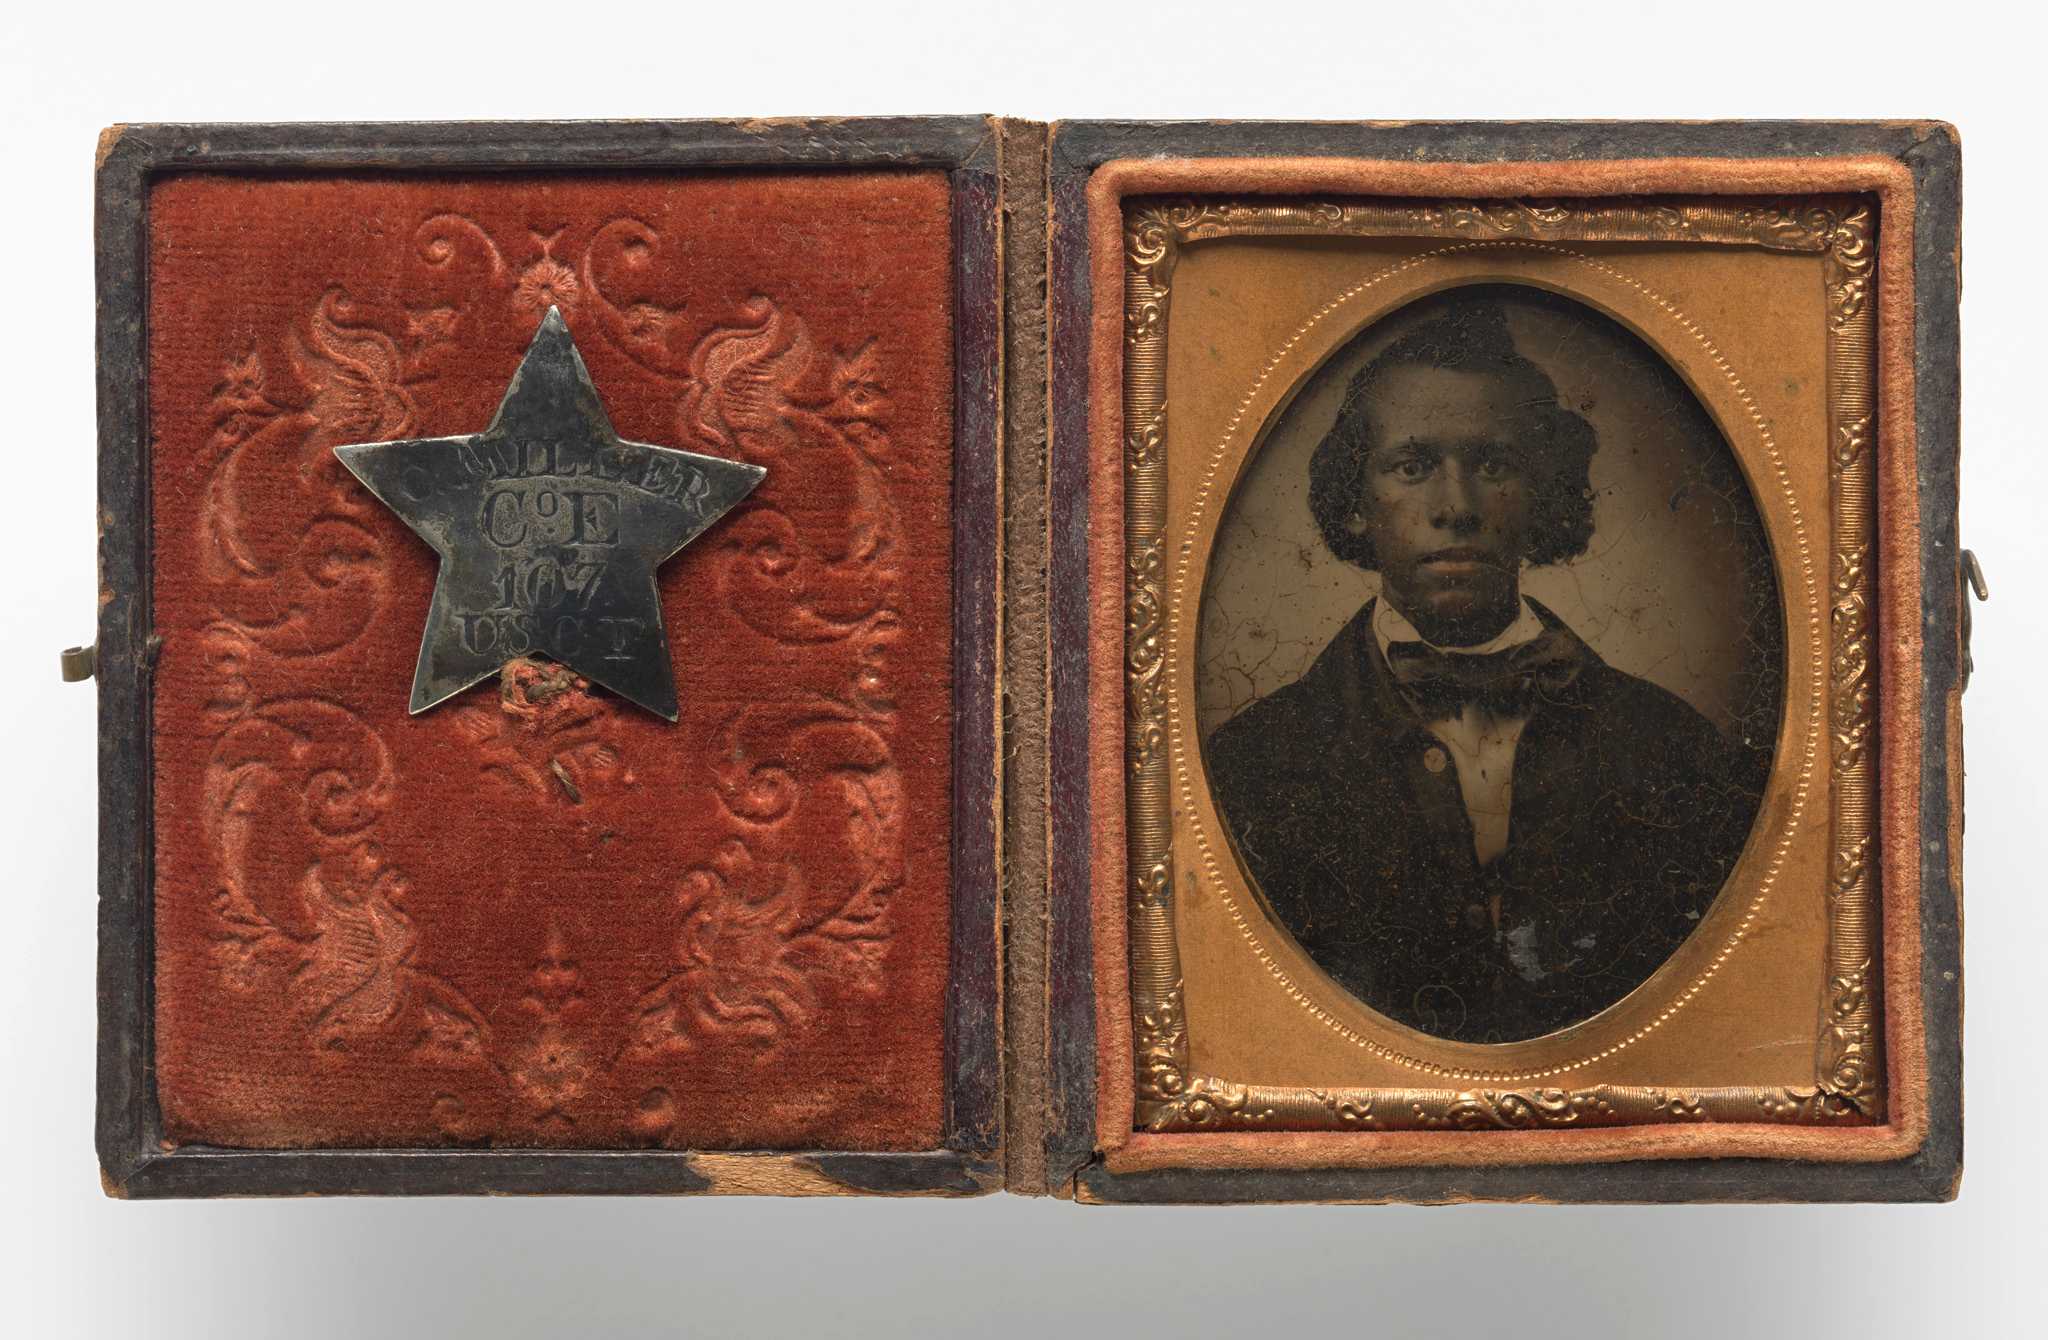 Tintype of Creed Miller, a soldier of the Kentucky 107th Regiment, Company E (and later Company C), United States Colored Troops. The tintype is encased in a copper scrolled frame with an oval window within a red velvet-lined, brown leather box. The tintype depicts Creed from the waist up in a dark overcoat, white collared shirt and bow-tie. His hair is styled and parted to the side. His miltary identification pin is fastened to the red velvet fabric on the interior of the case. The pin is a silver five pointed star with  [C. MILLER / Co. E / 107 / USCT] engraved at center. The front and back of the case is brown leather with detailed scroll work consisting of vines and flowers. The case has a metal hook and eye closure.